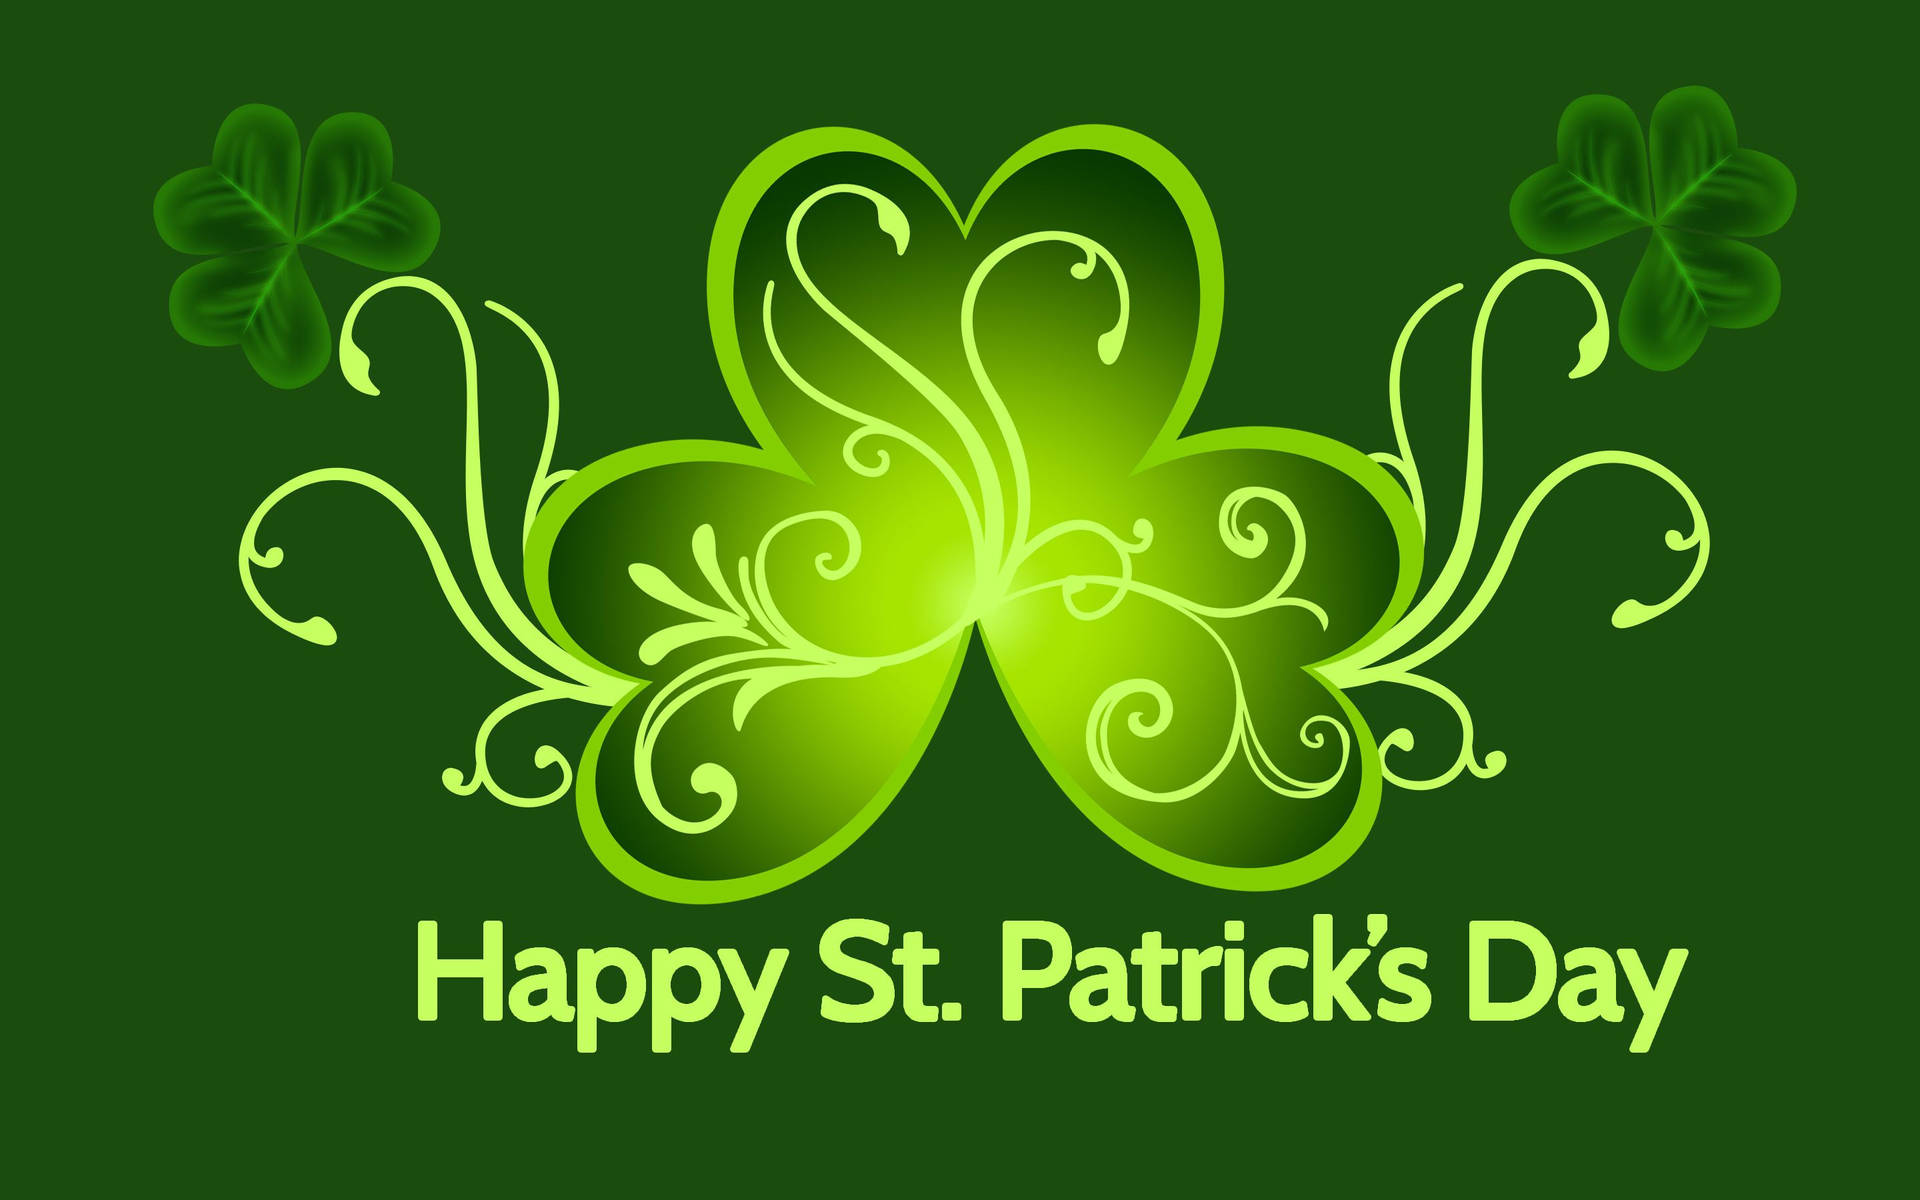 Saint Patrick’s Day On Solid Green Background